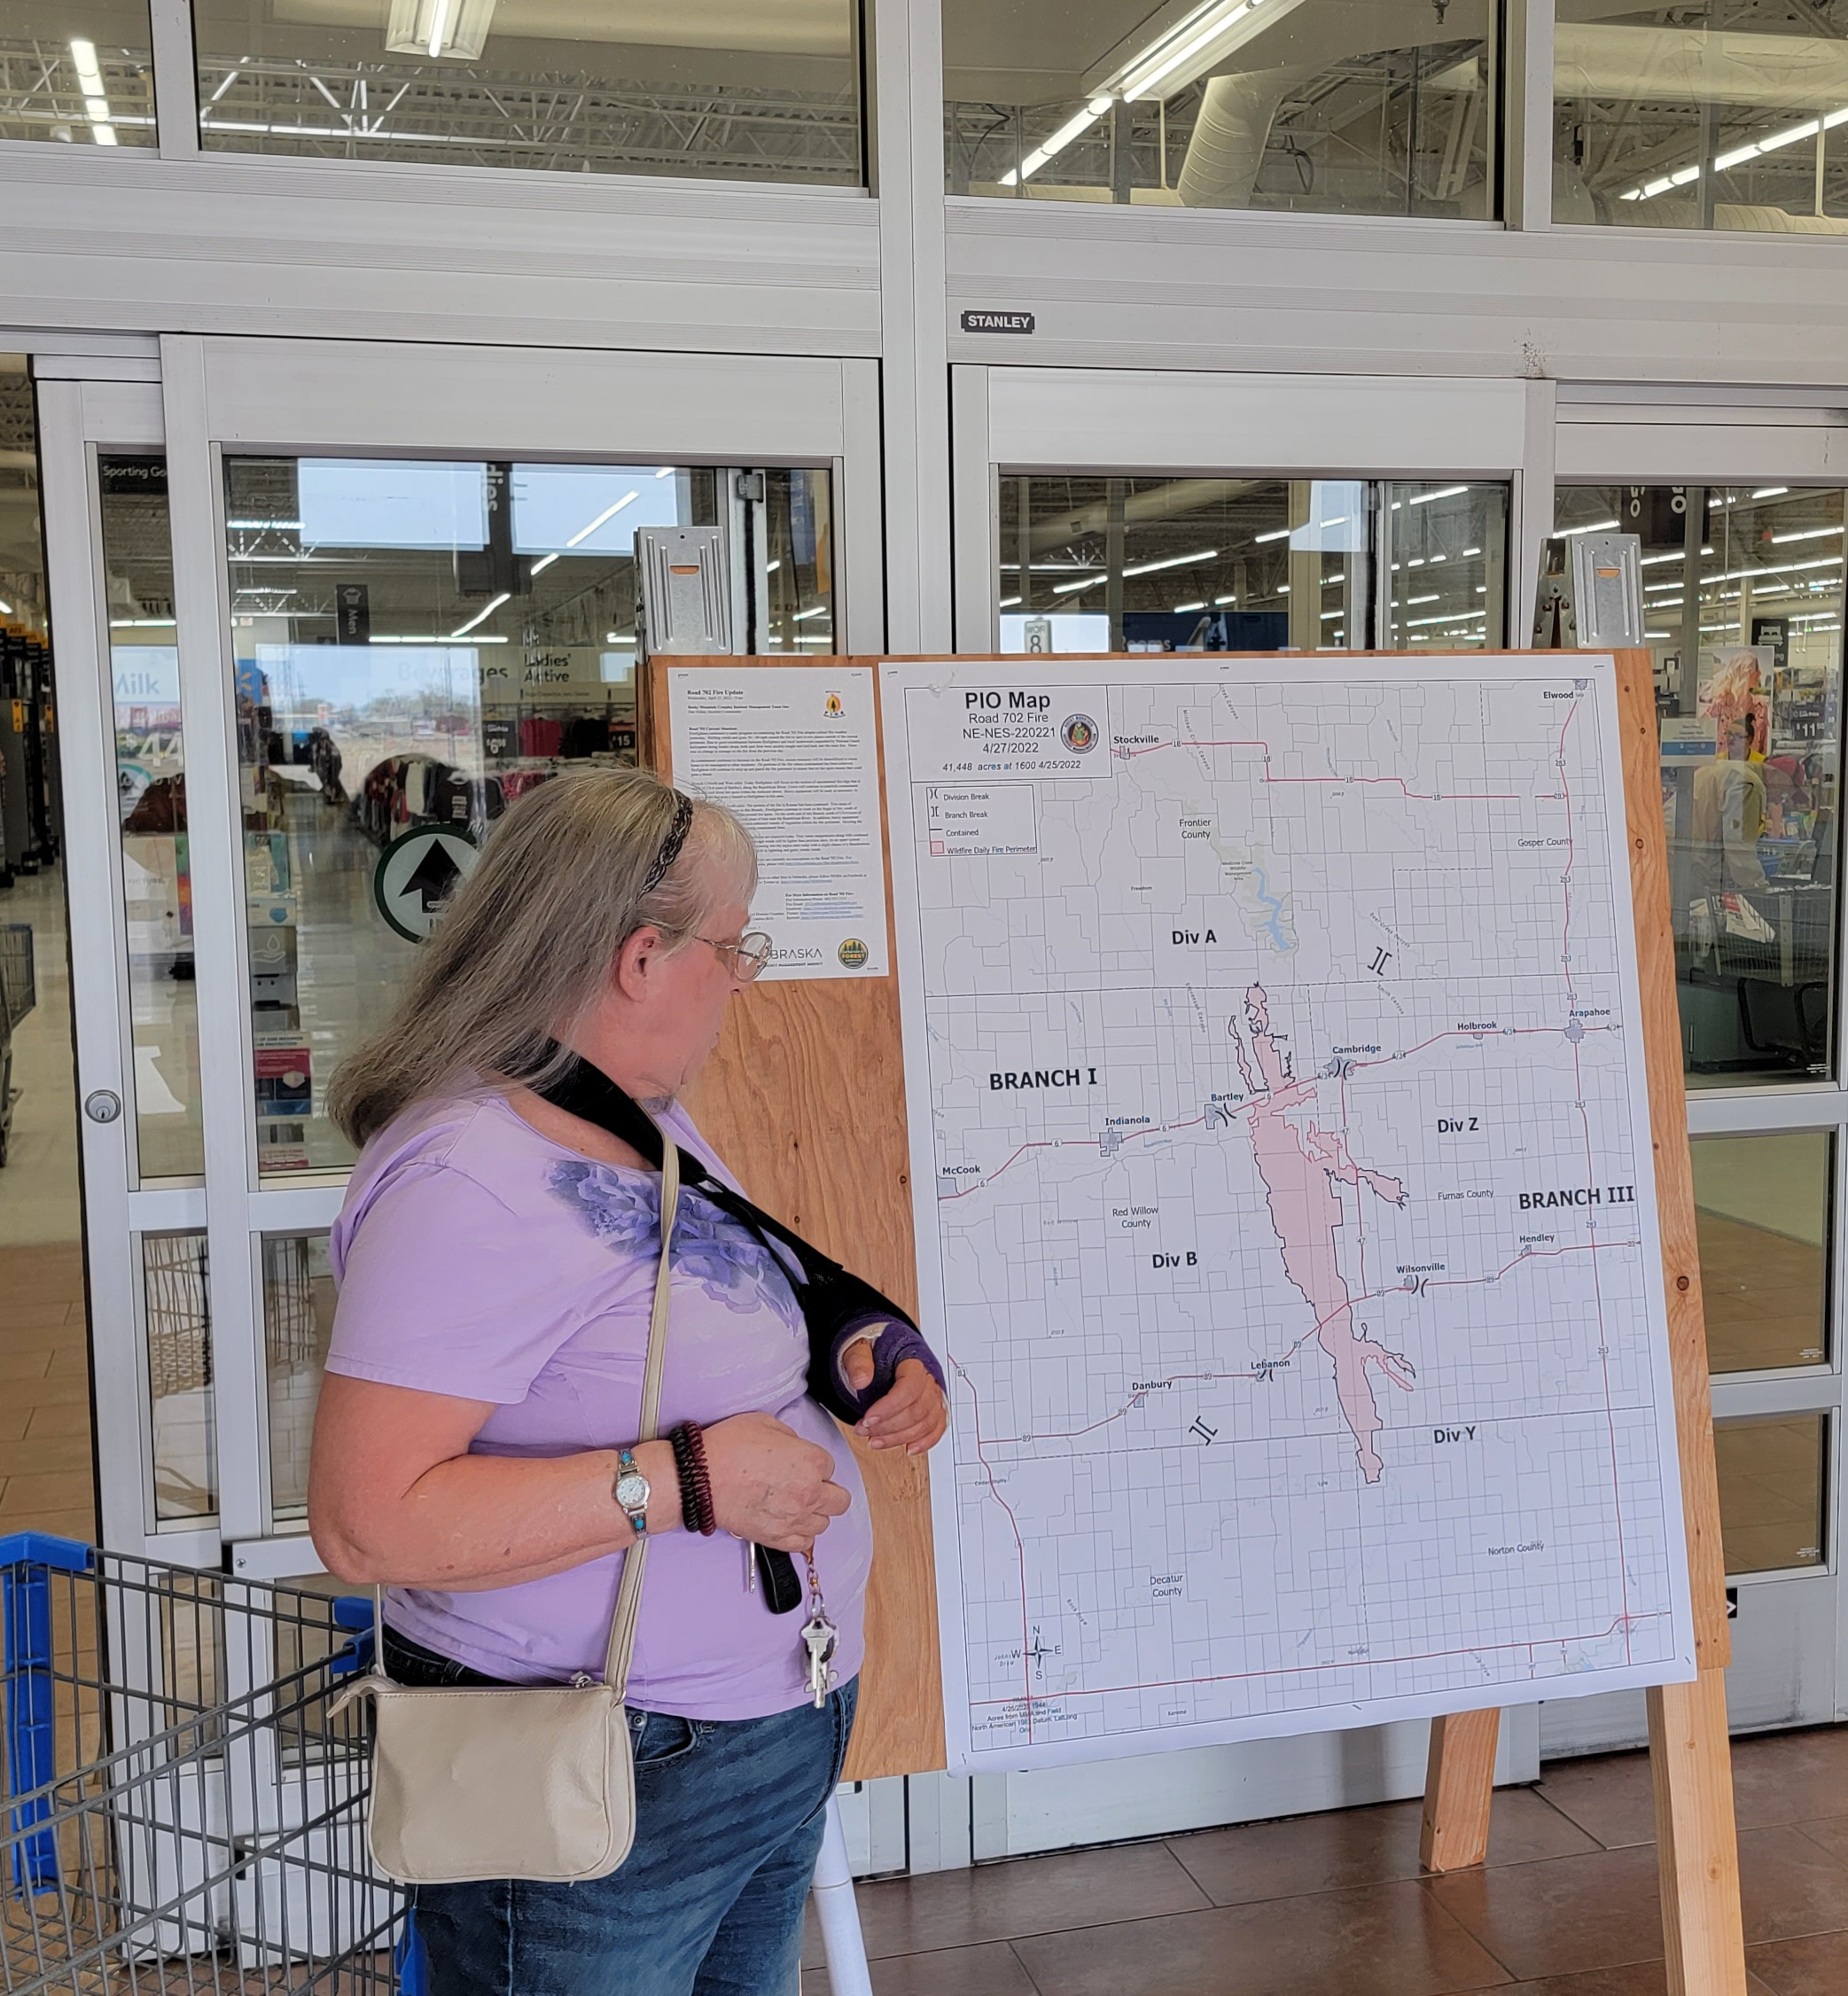 A woman is reviewing the information and map on a board at Walmart.